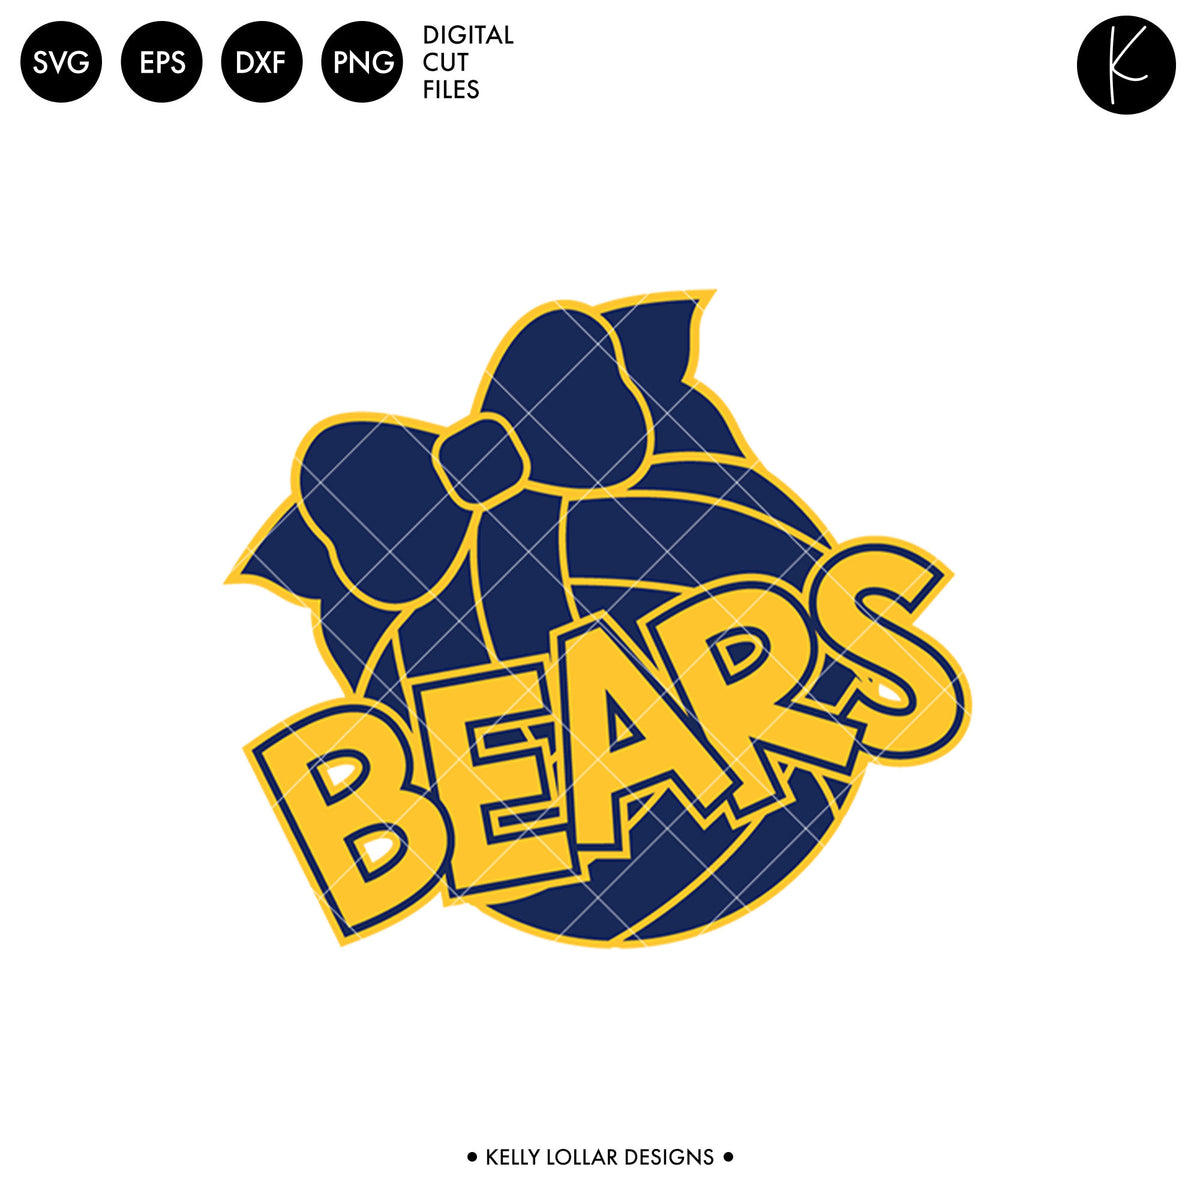 Bears Volleyball Bundle | SVG DXF EPS PNG Cut Files